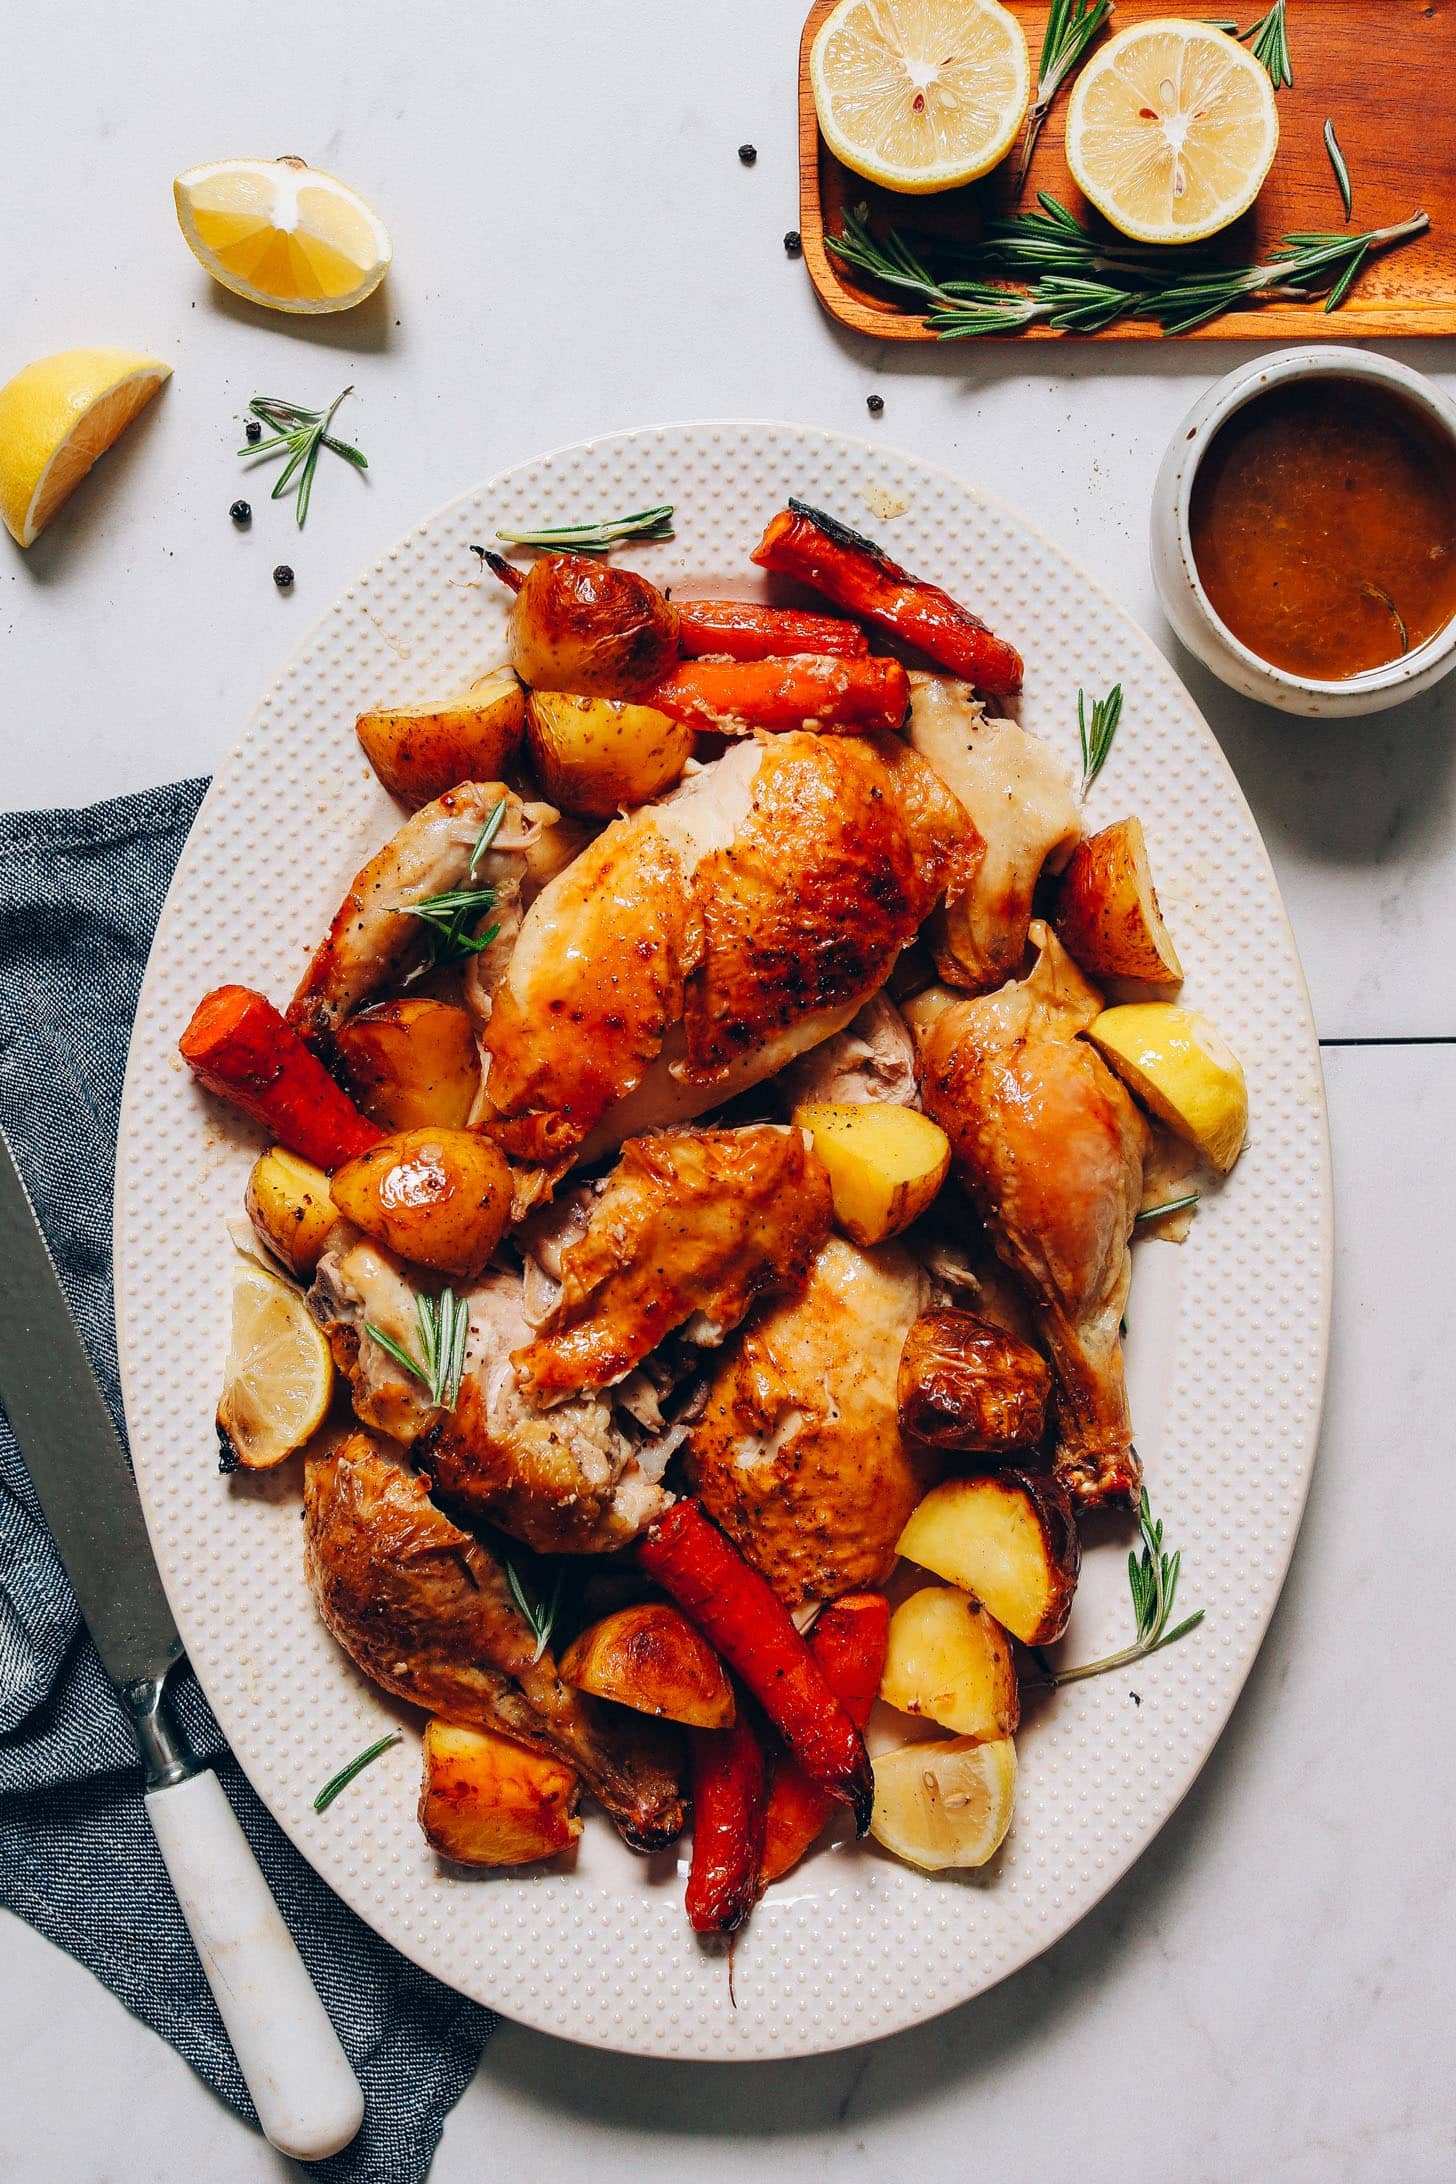 Sliced roasted chicken served with potatoes and roasted veggies on plate.